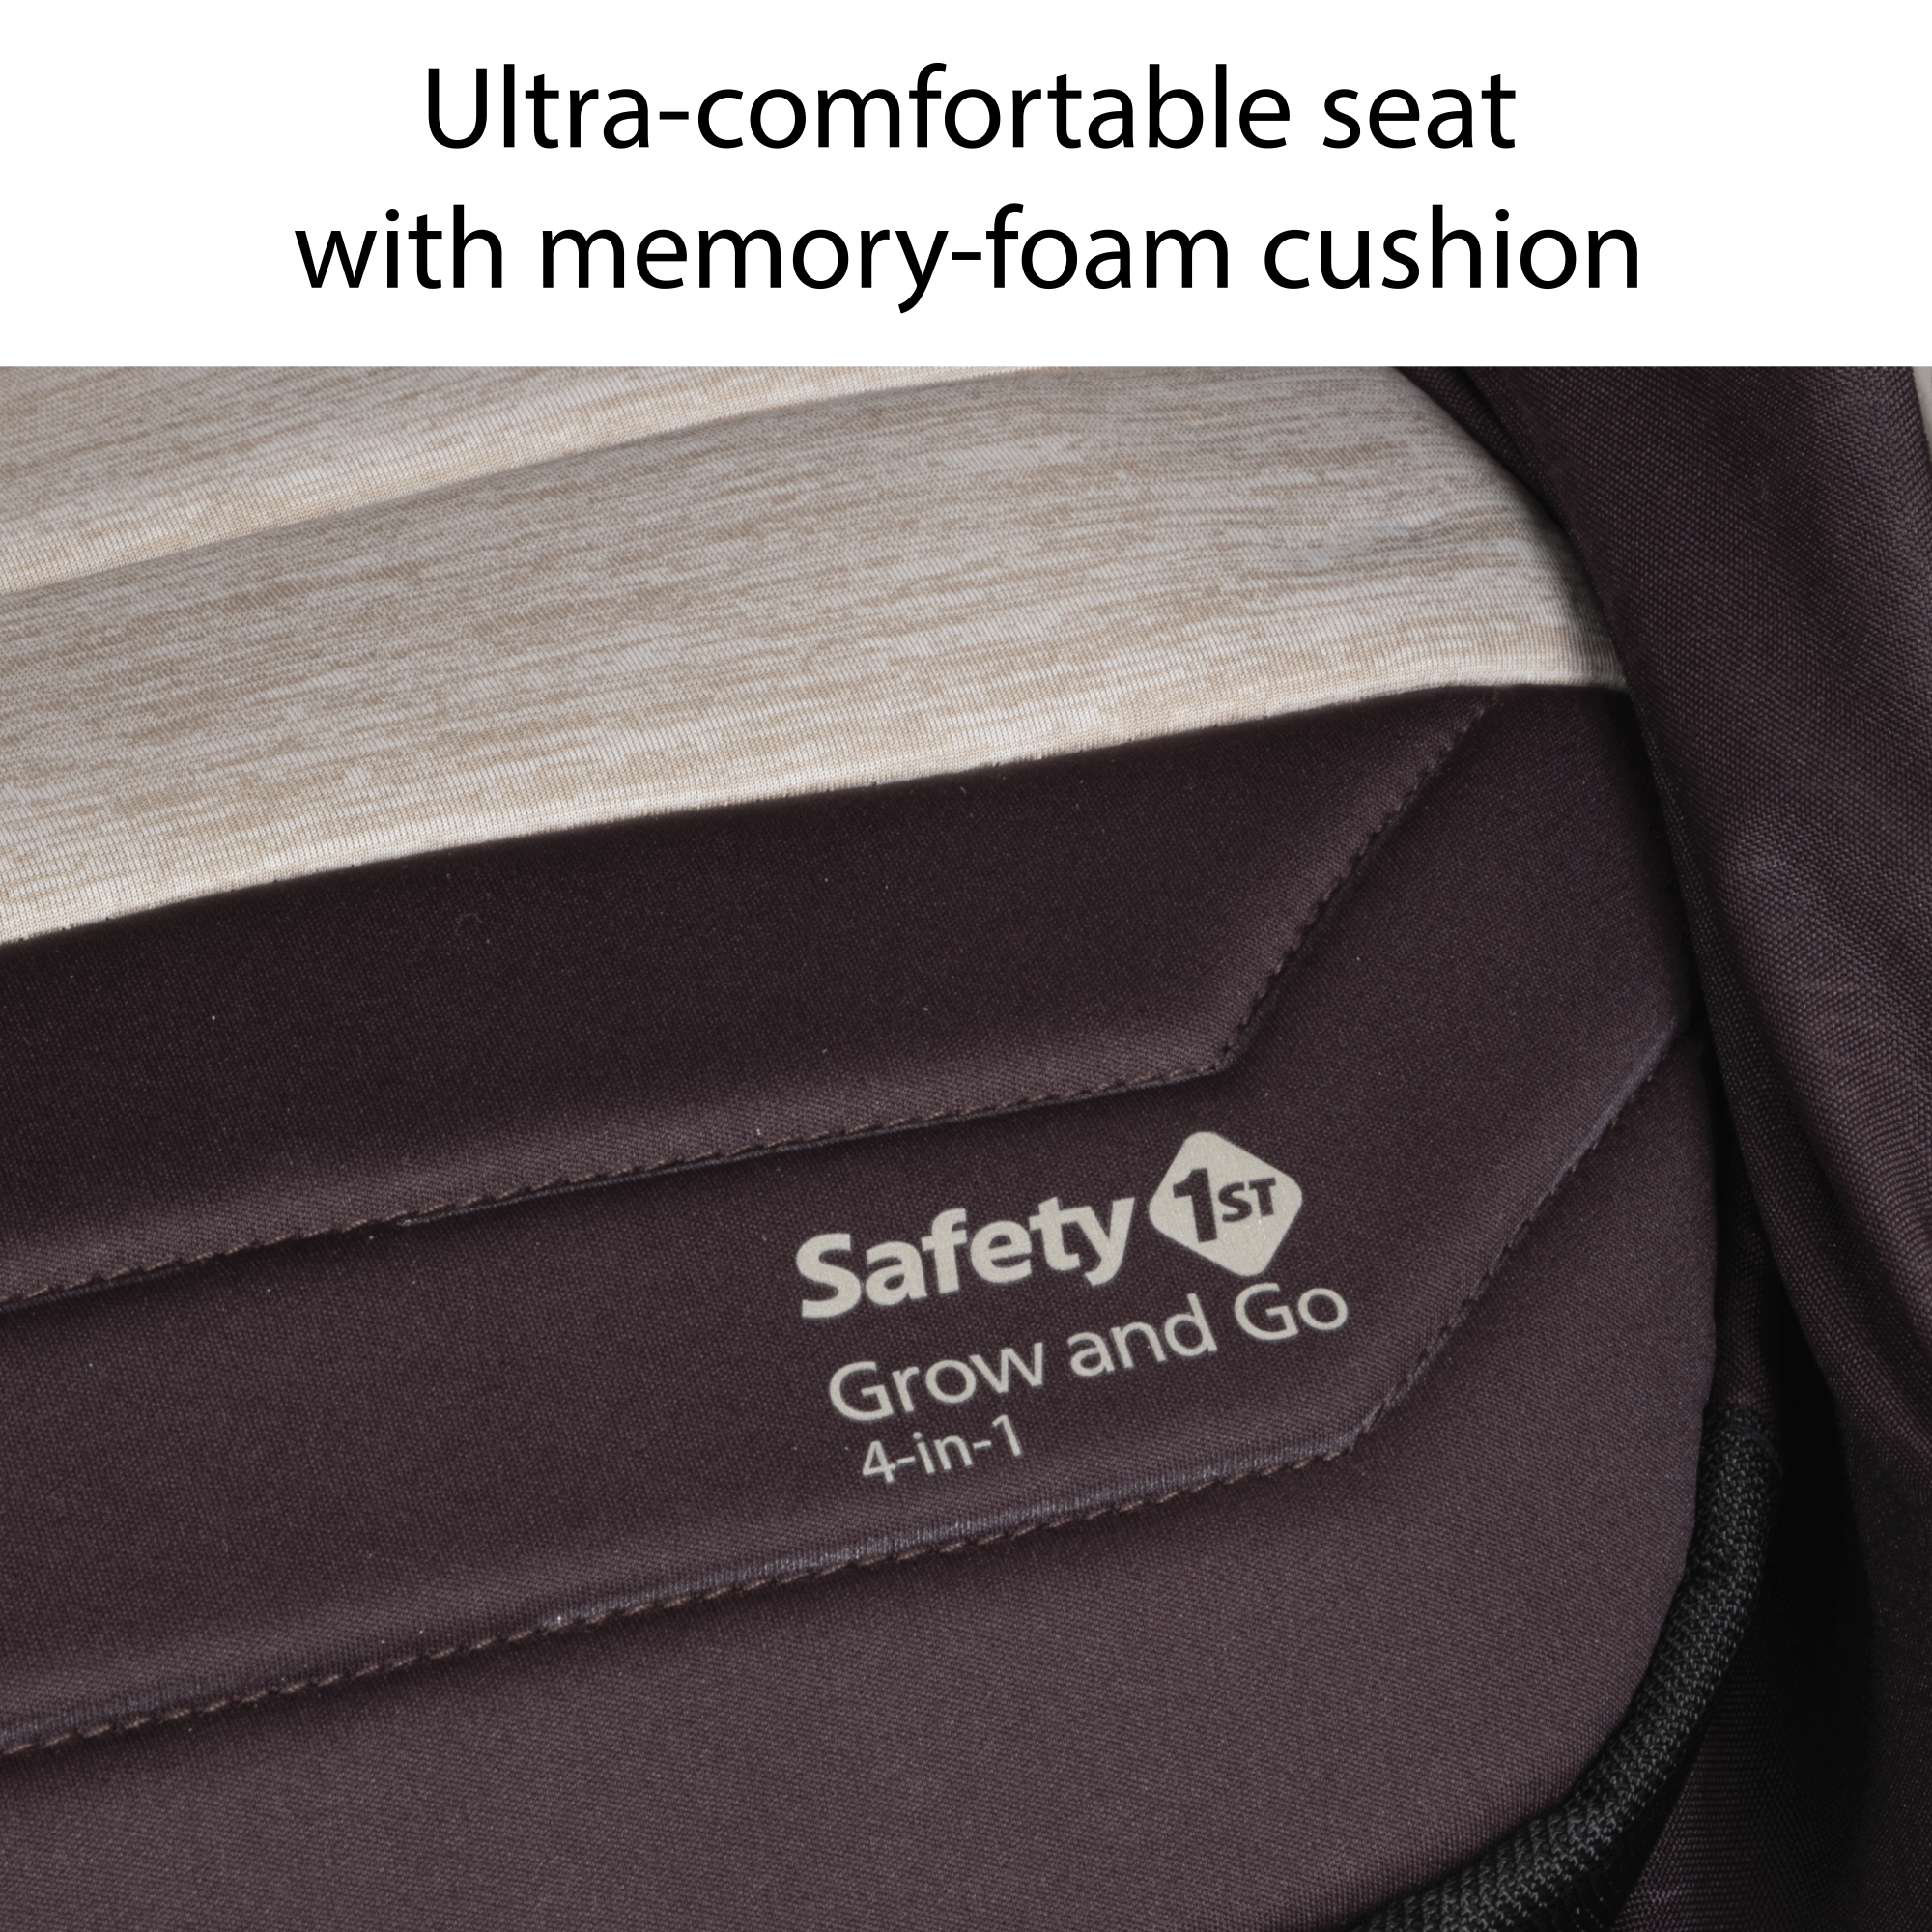 Deluxe Grow and Go™ Flex 8-in-1 Travel System - ultra-comfortable seat with memory-foam cushion